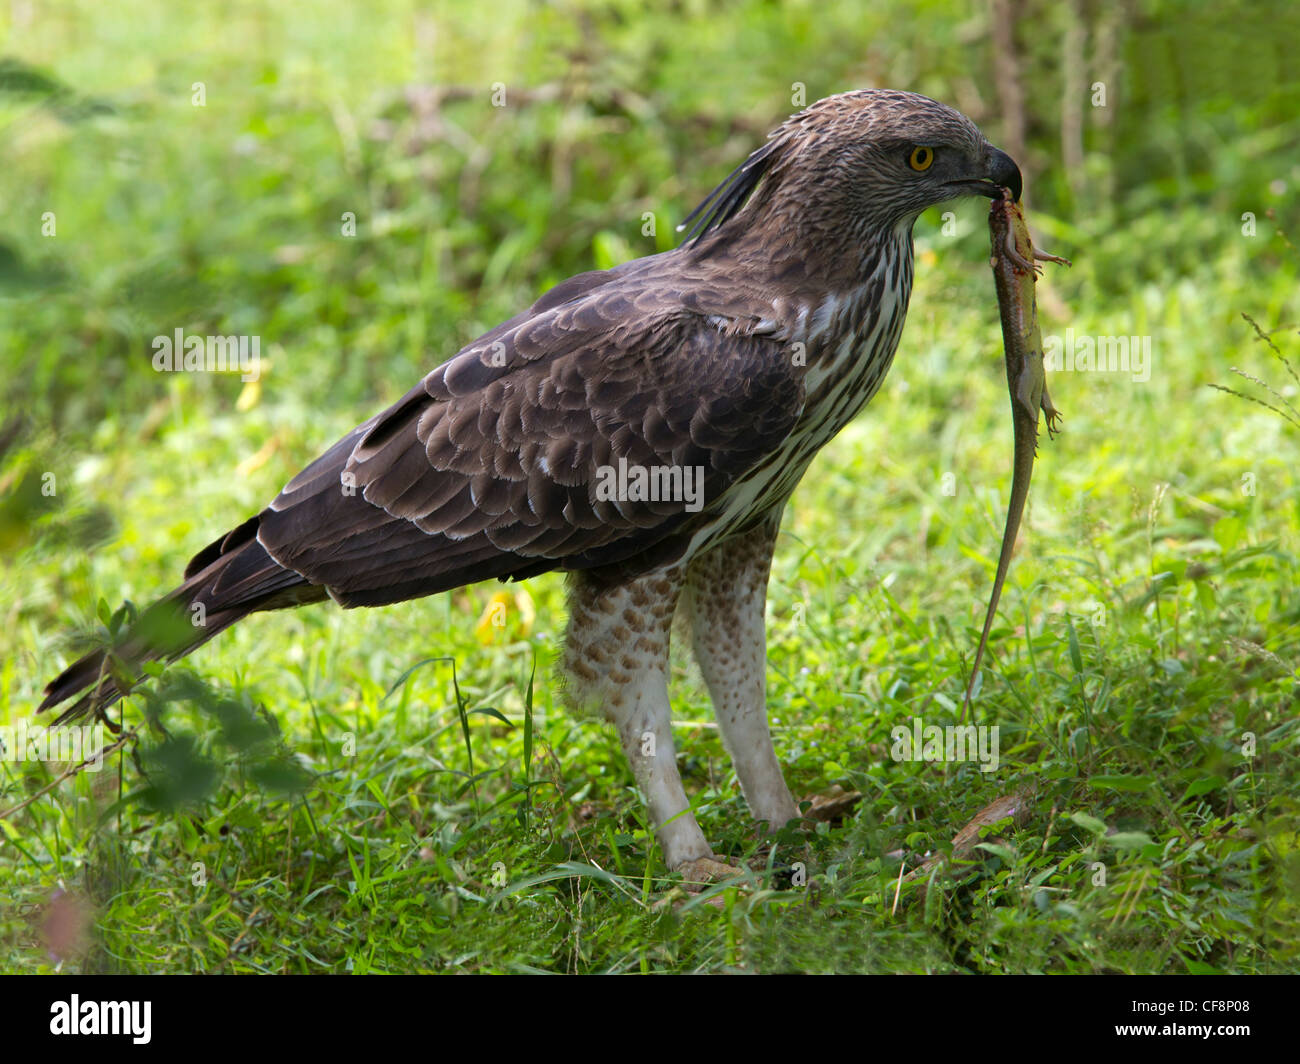 Changeable, crested hawk-eagle with lizard Stock Photo